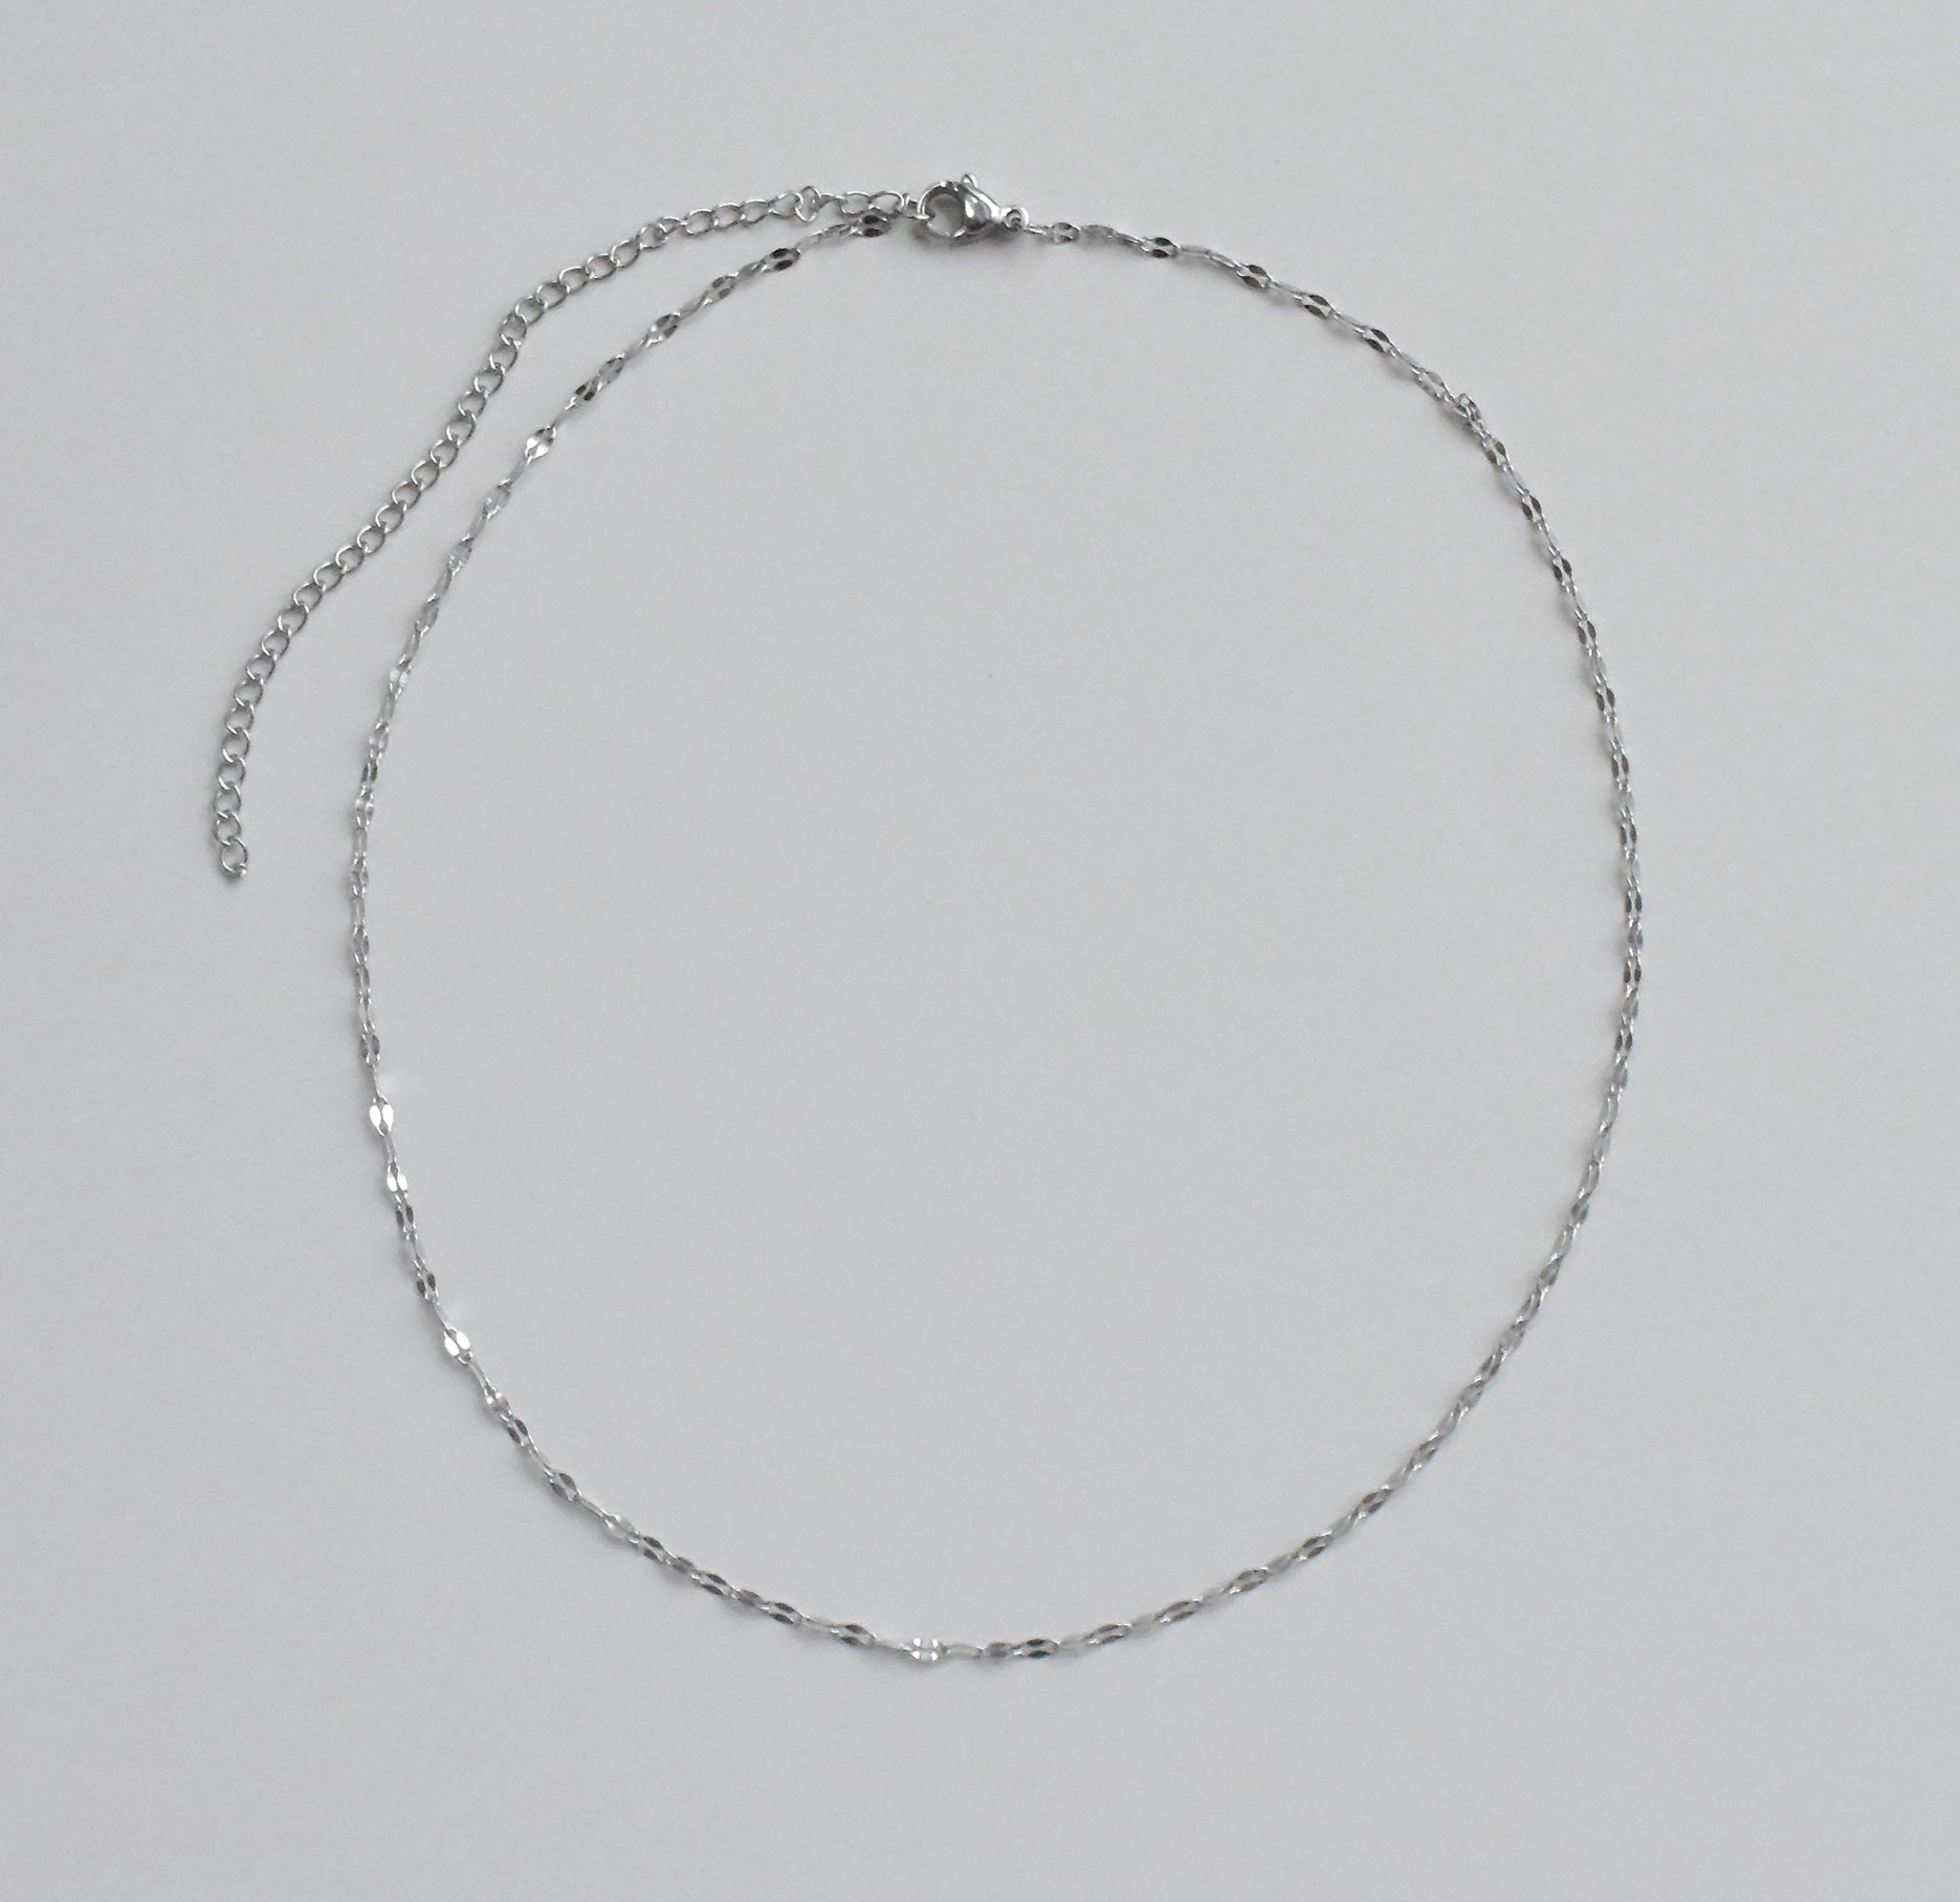 Triple Silver Necklace Chain Set - Waterproof Chains